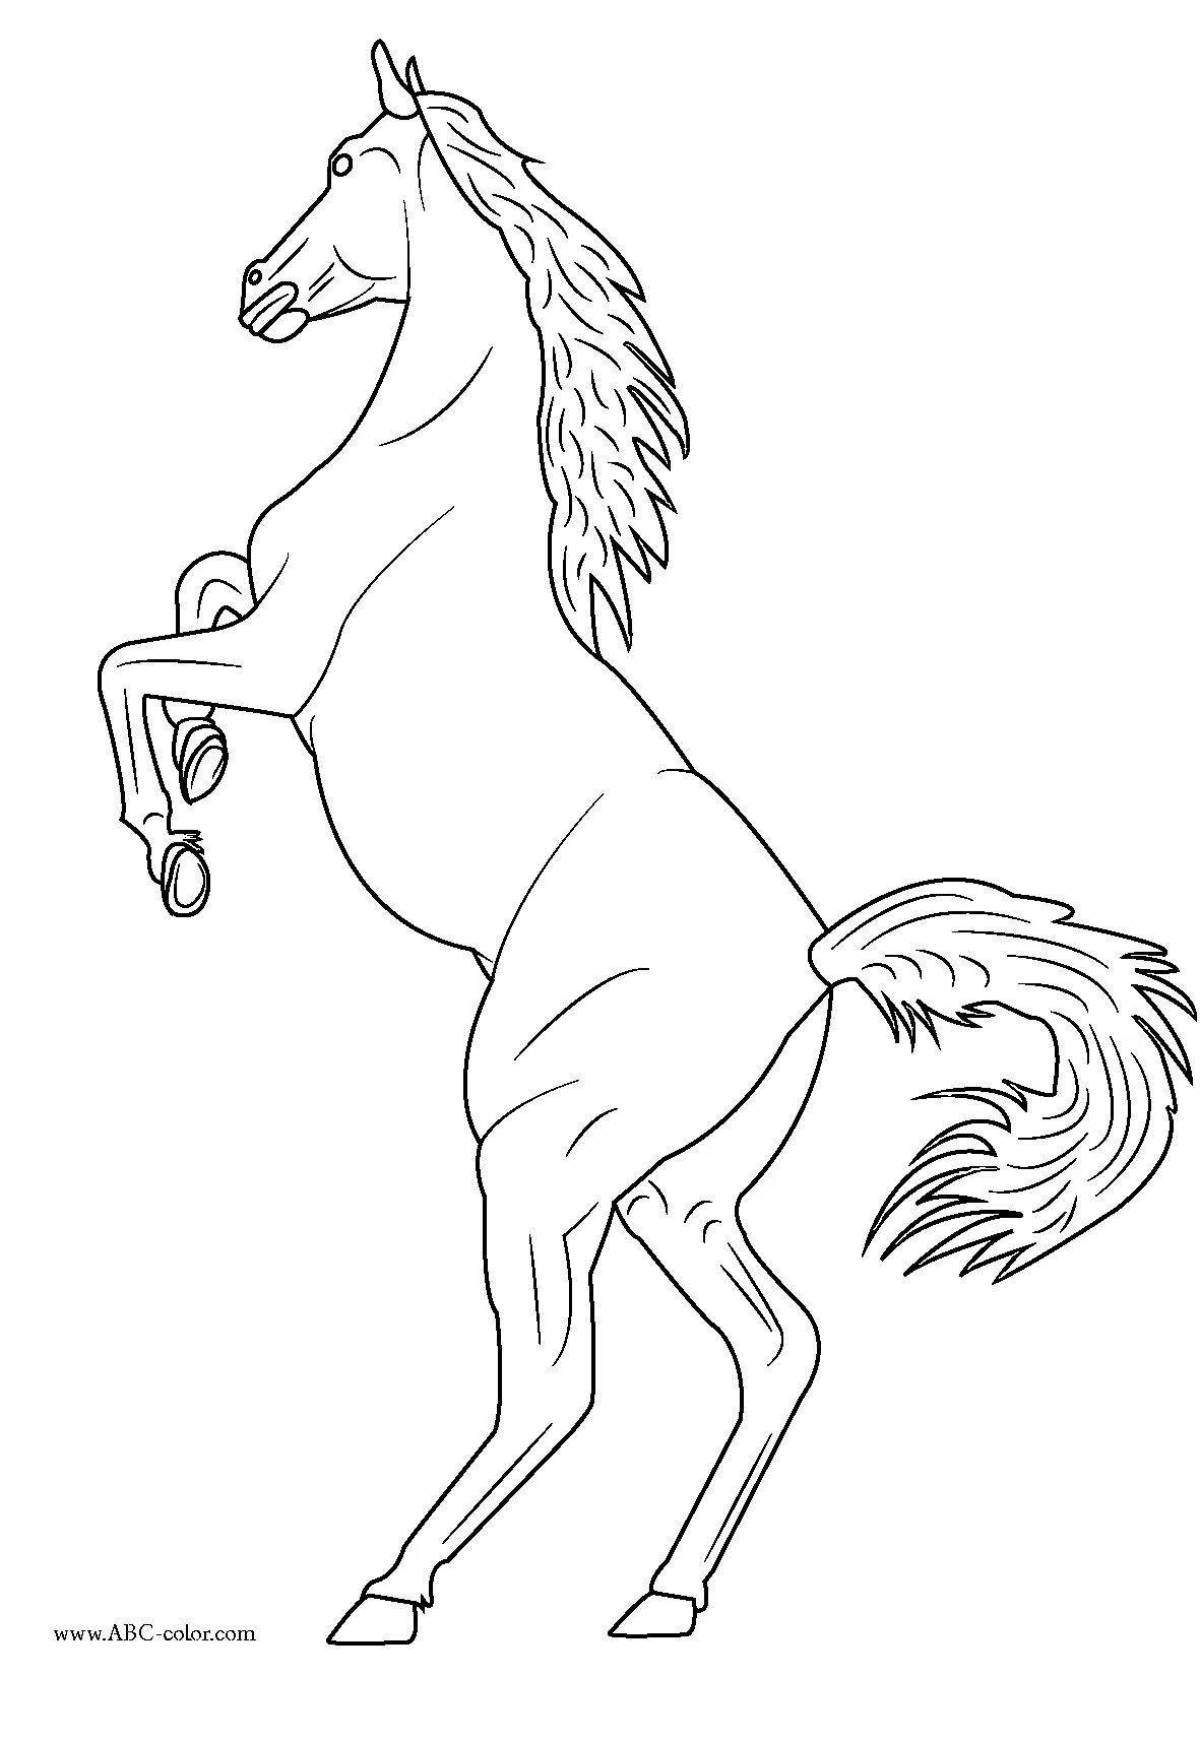 Awesome rearing horse coloring page